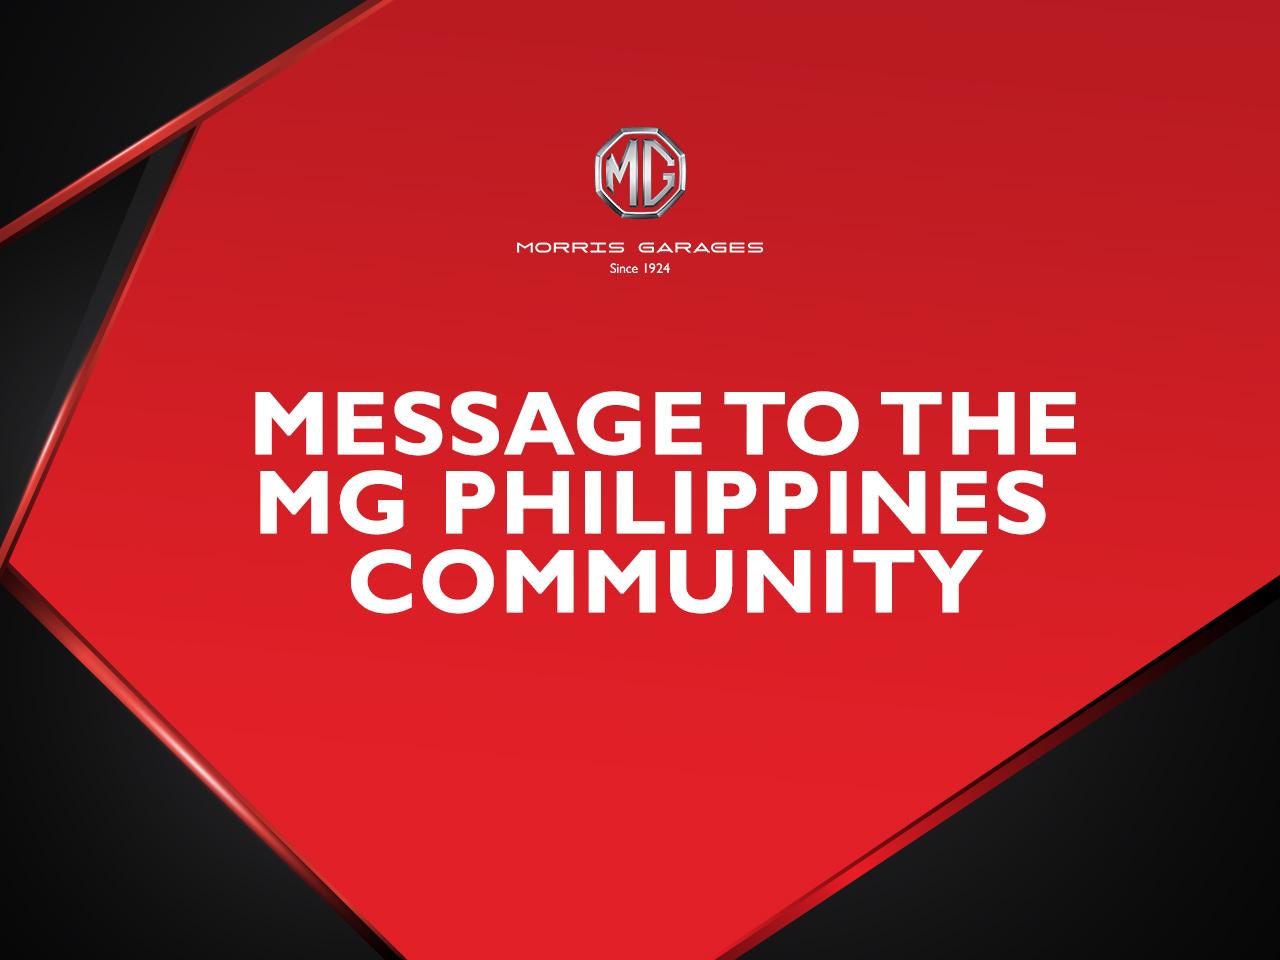 MESSAGE TO THE MG PHILIPPINES COMMUNITY